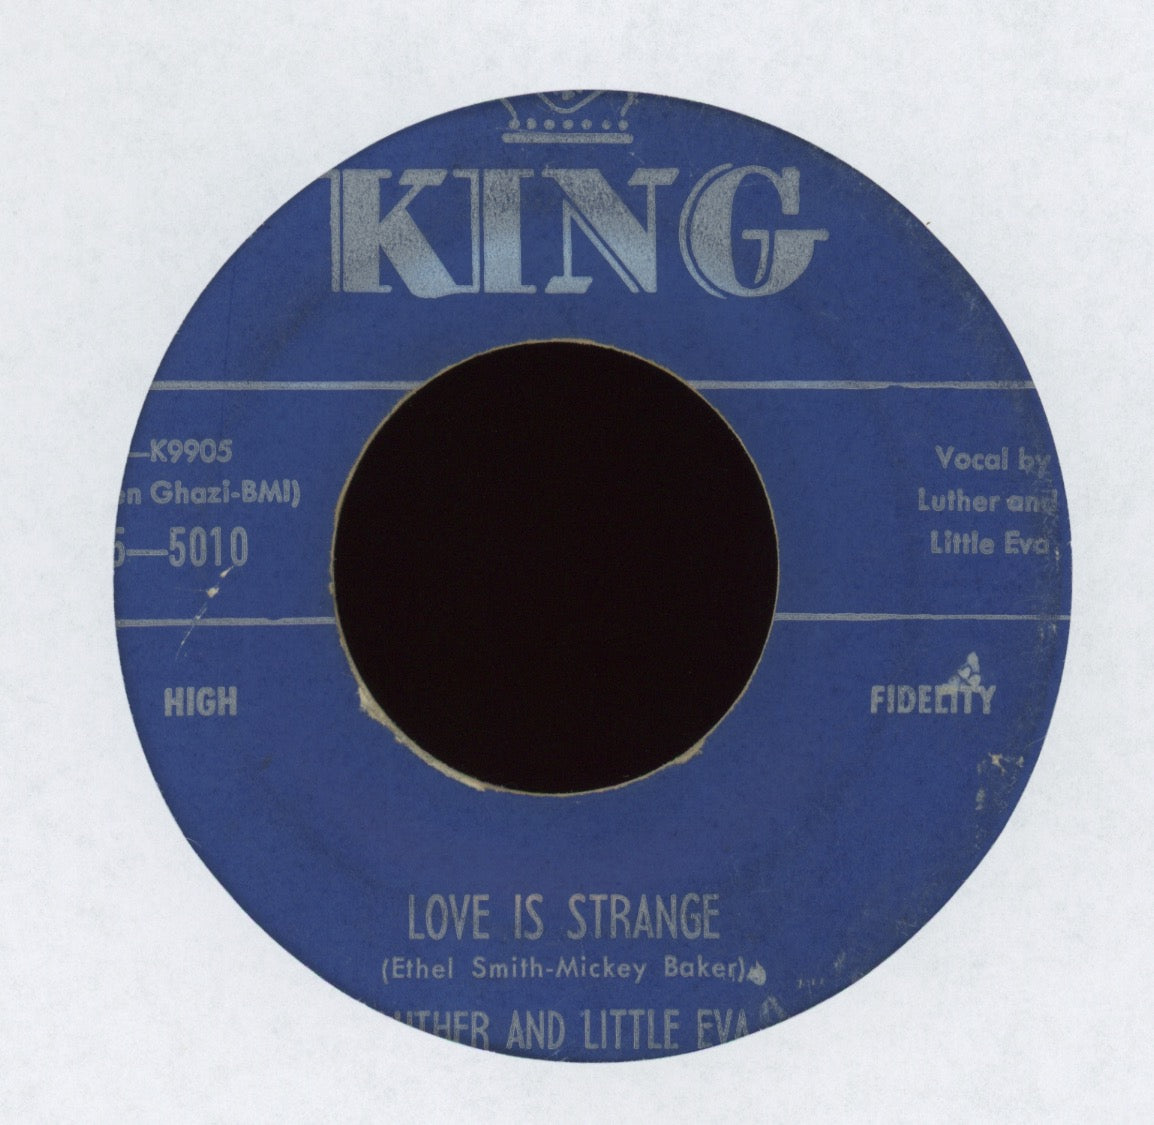 Luther & Little Eva - Ain't Got No Home on King